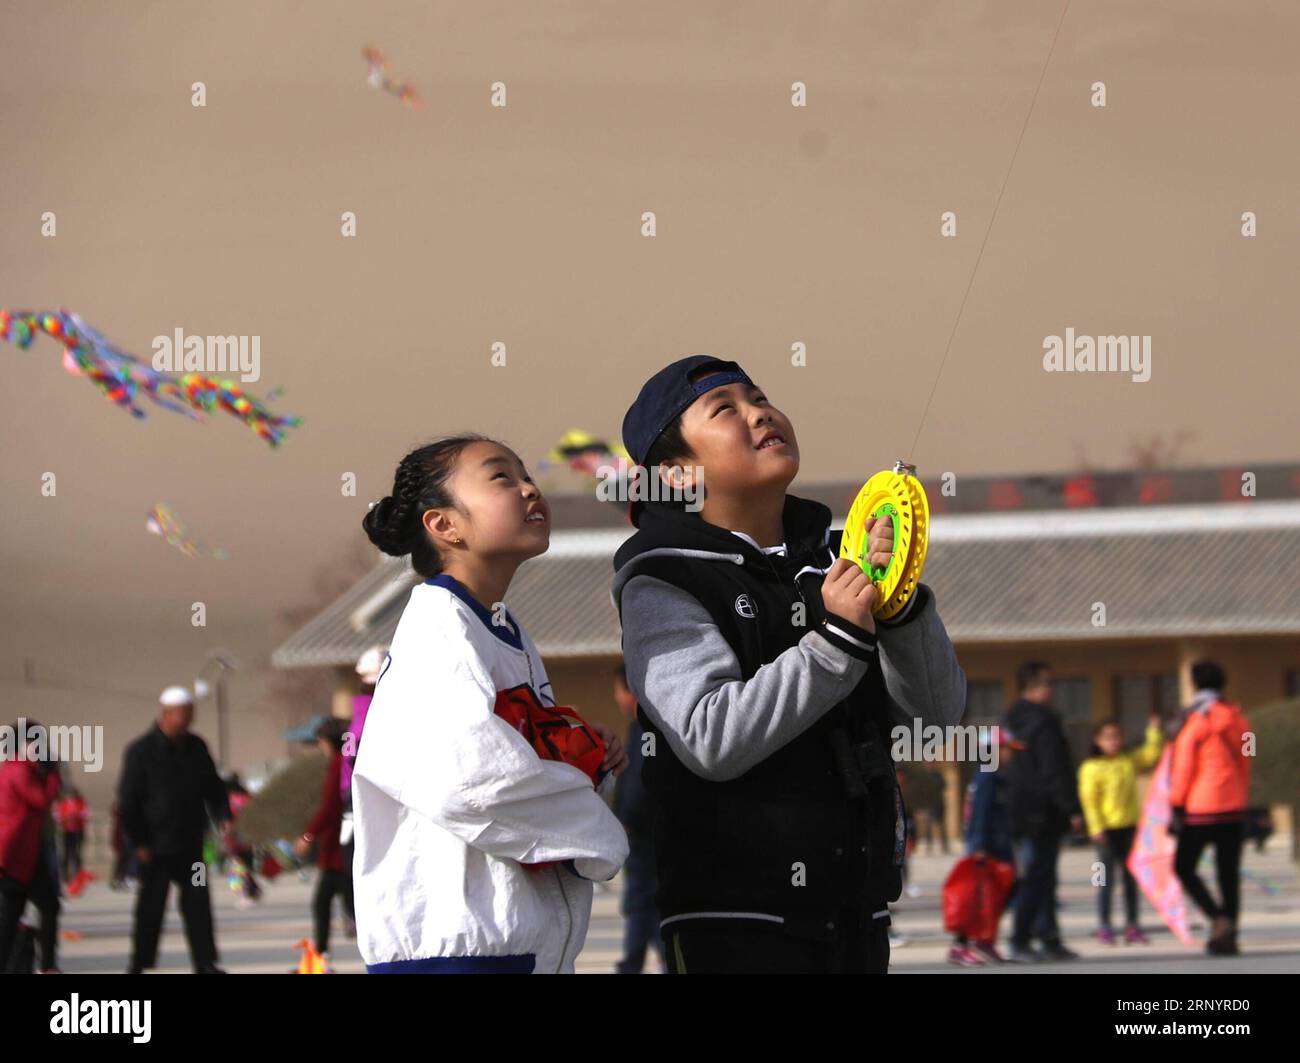 (180331) -- DUNHUANG, March 31, 2018 -- People fly kites at the scenic spot of the Crescent Spring, a crescent-shaped lake surrounded by deserts at the foot of the Mingsha Hill, in Dunhuang, northwest China s Gansu province, March 31, 2018. ) (dhf) CHINA-GANSU-DUNHUANG-KITE (CN) ZhangxXiaoliang PUBLICATIONxNOTxINxCHN Stock Photo